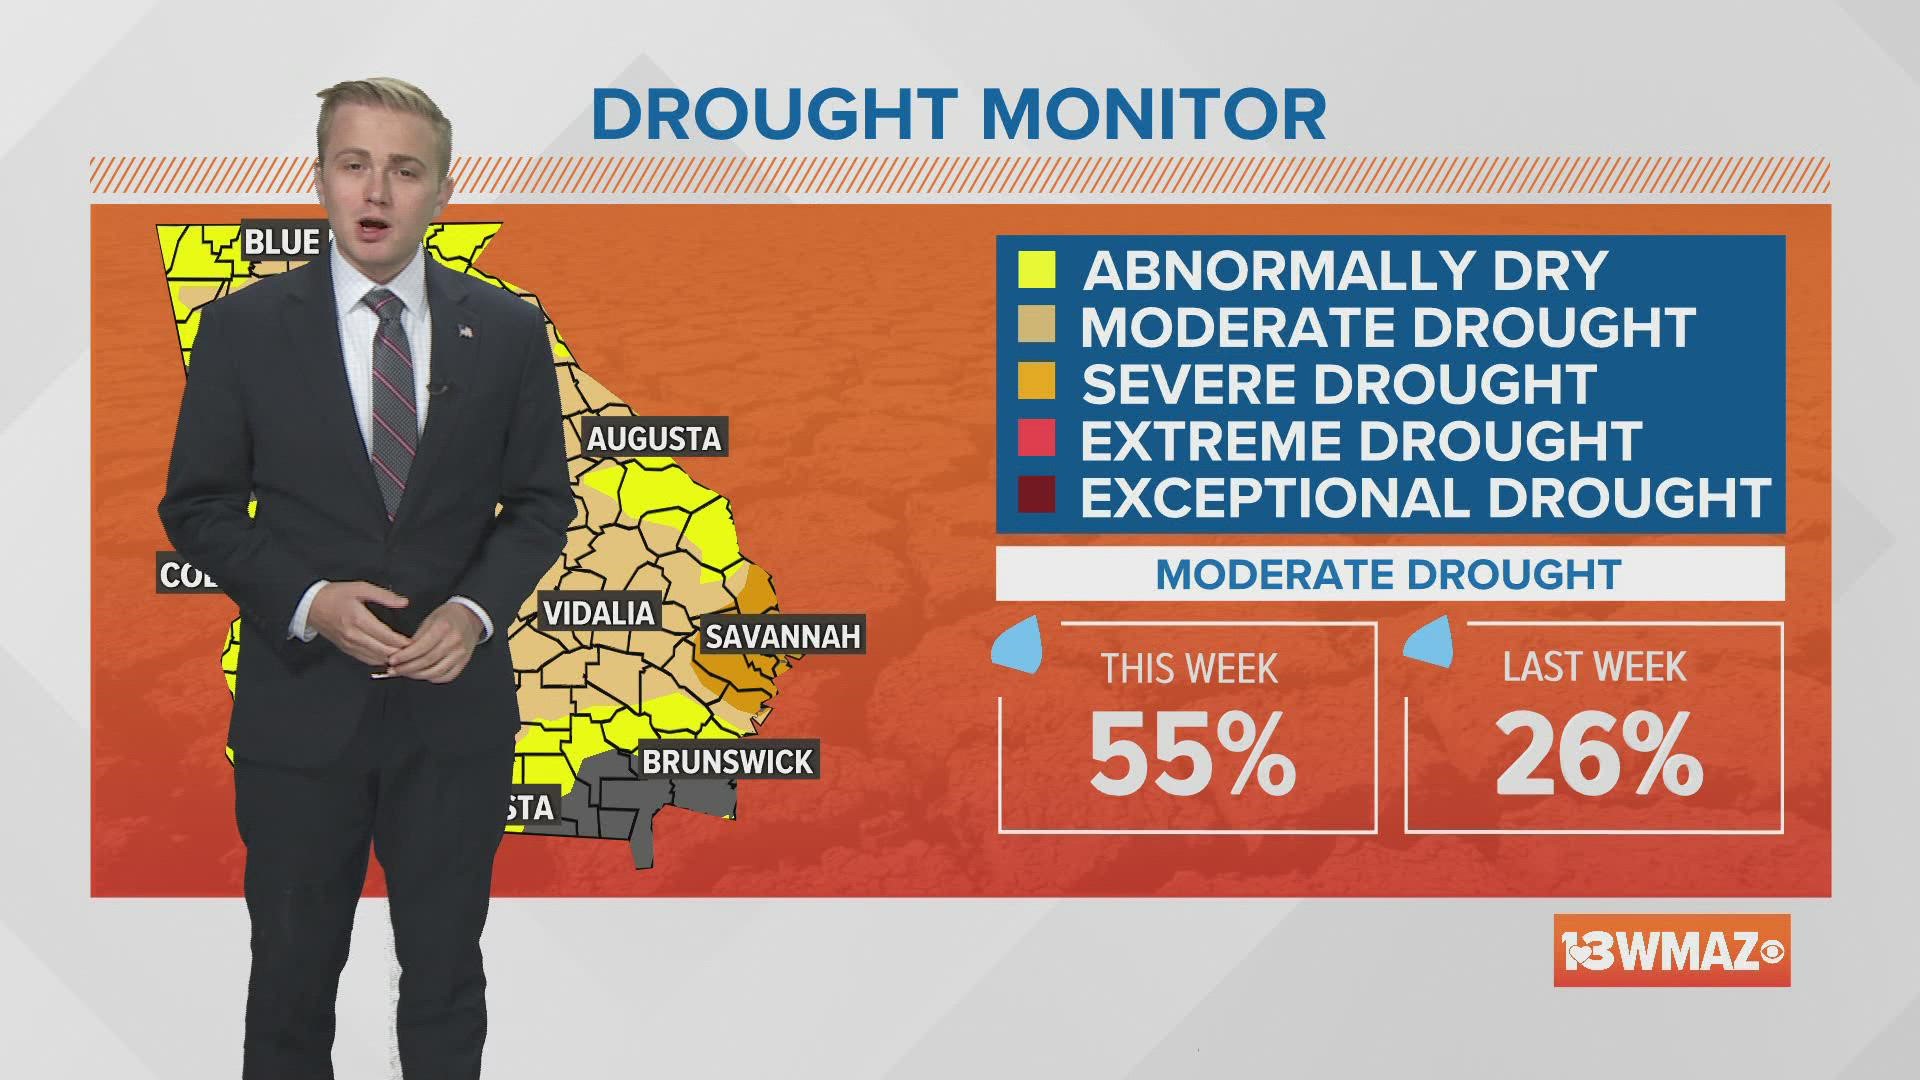 More than half of Georgia is considered to be in 'moderate drought.'